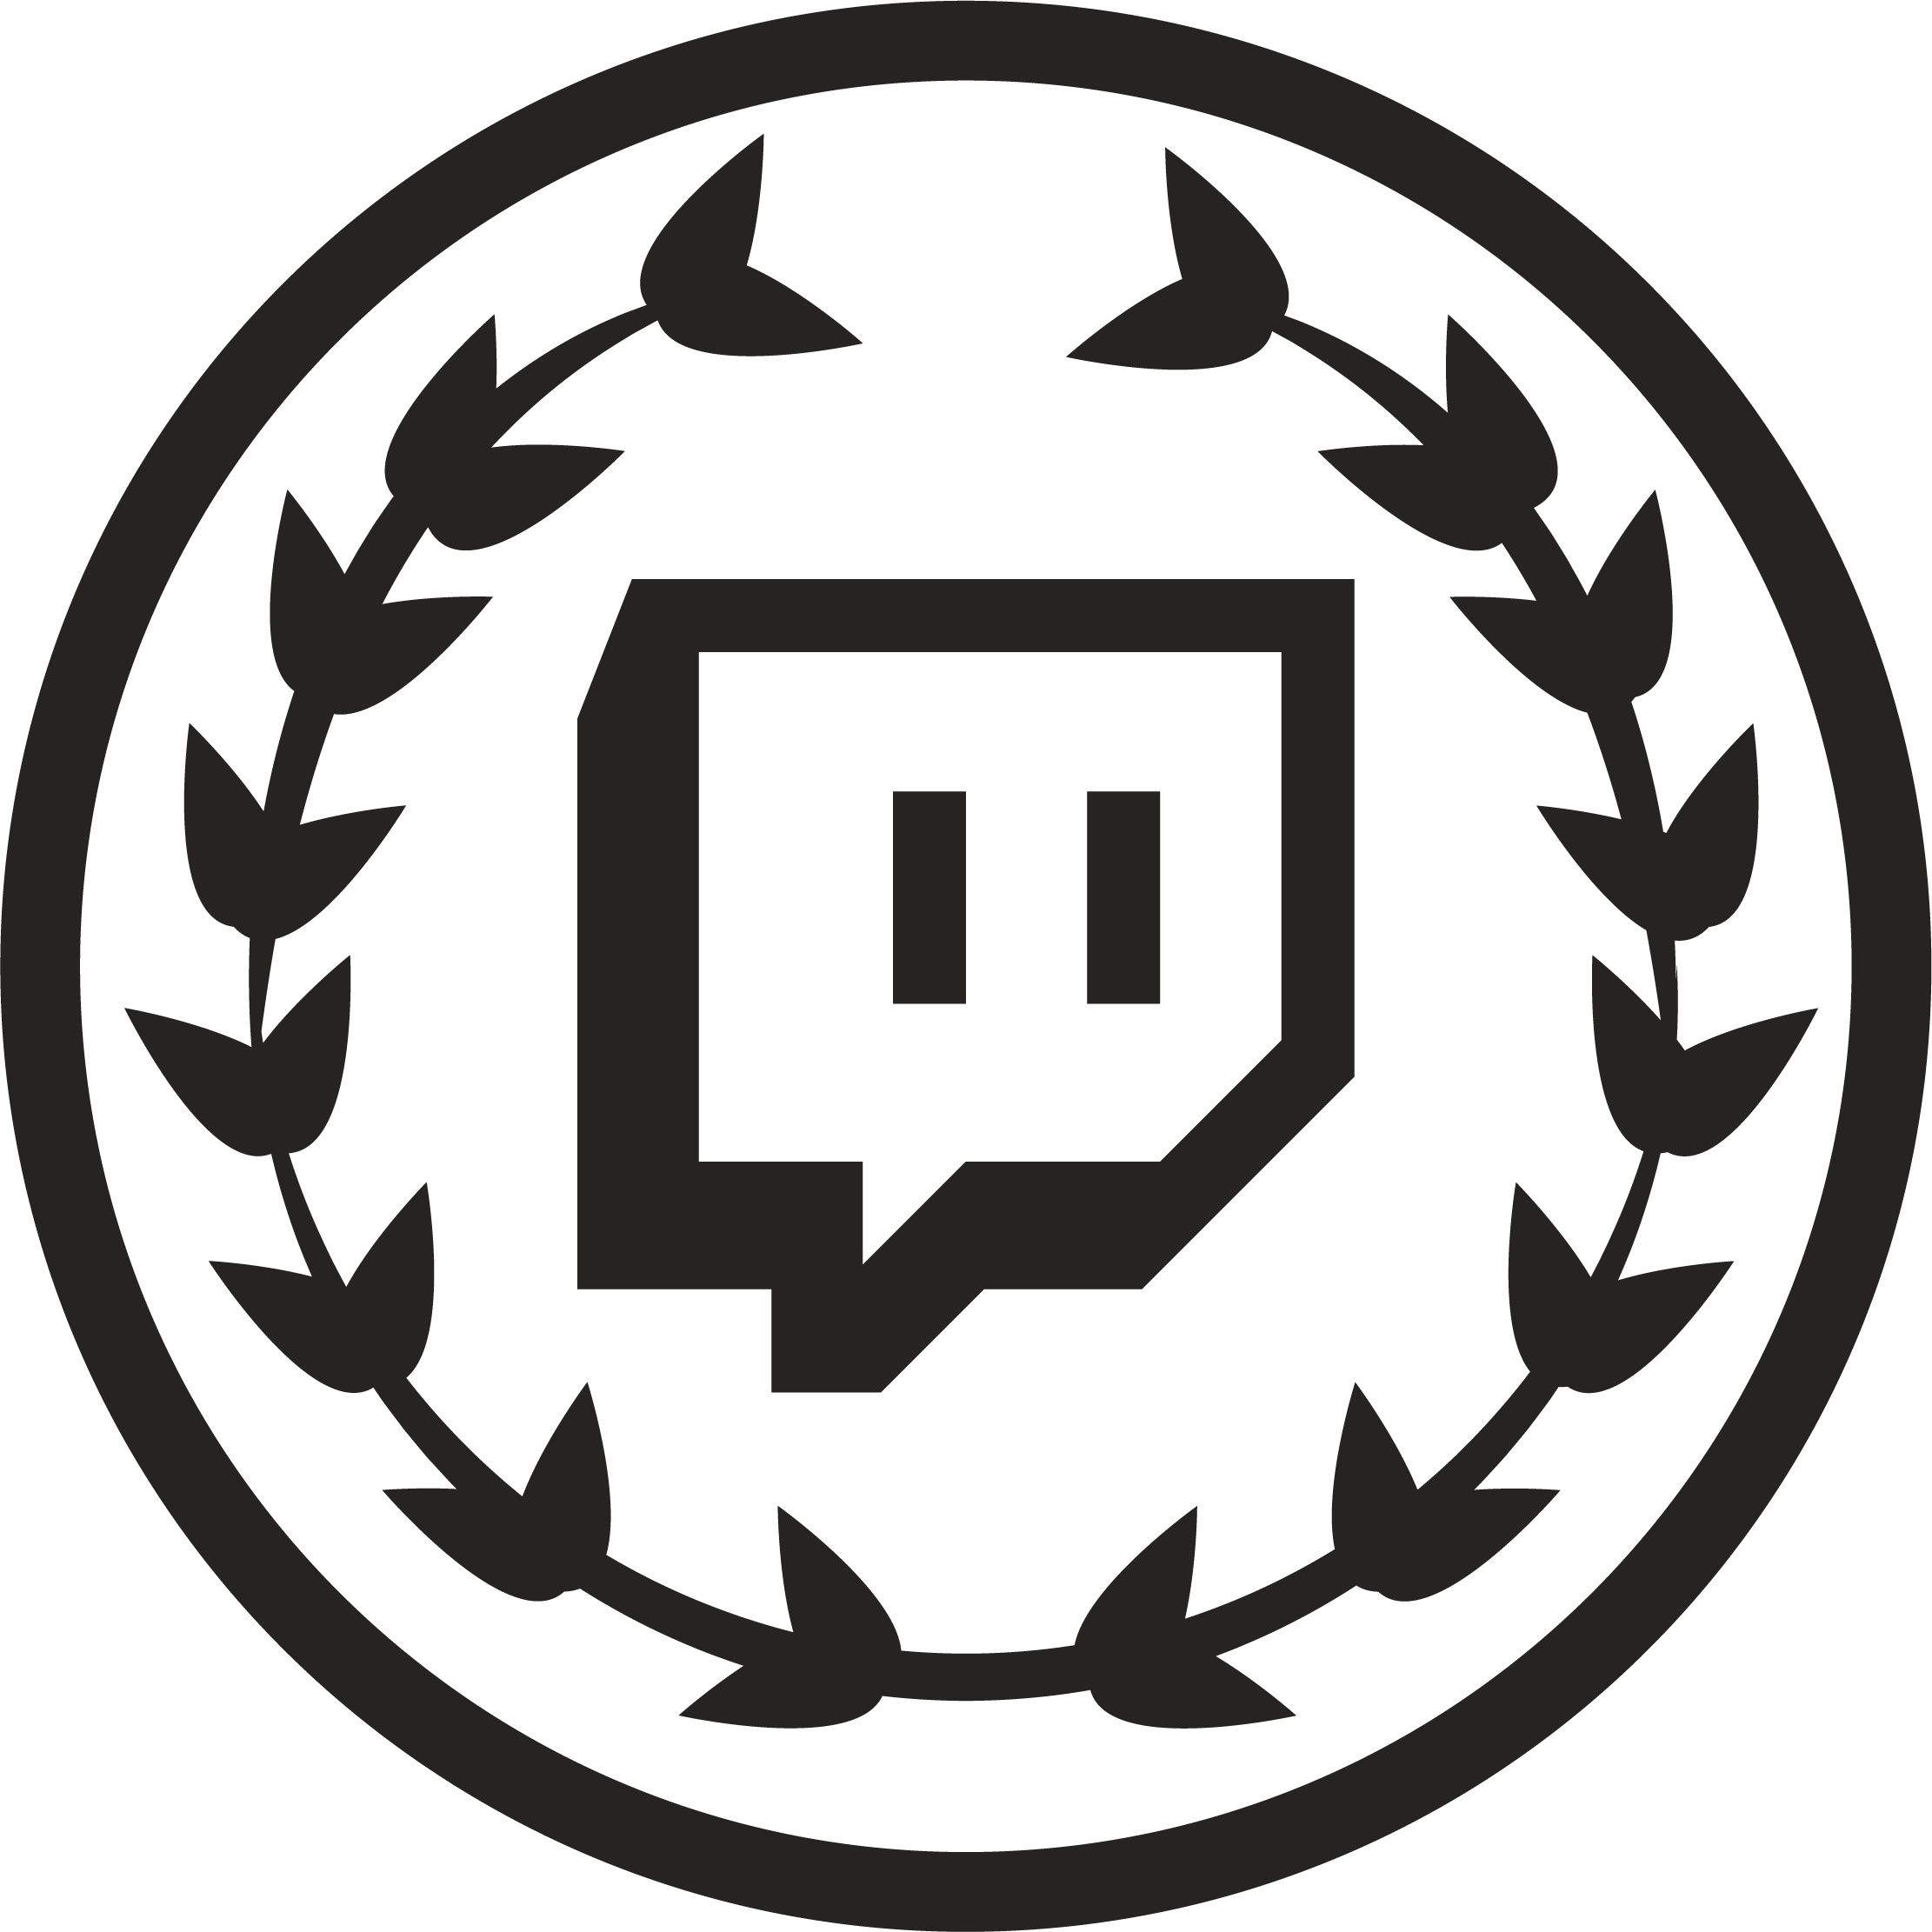 Download Twitch Student Logo - Transparent Background Twitch Logo Png